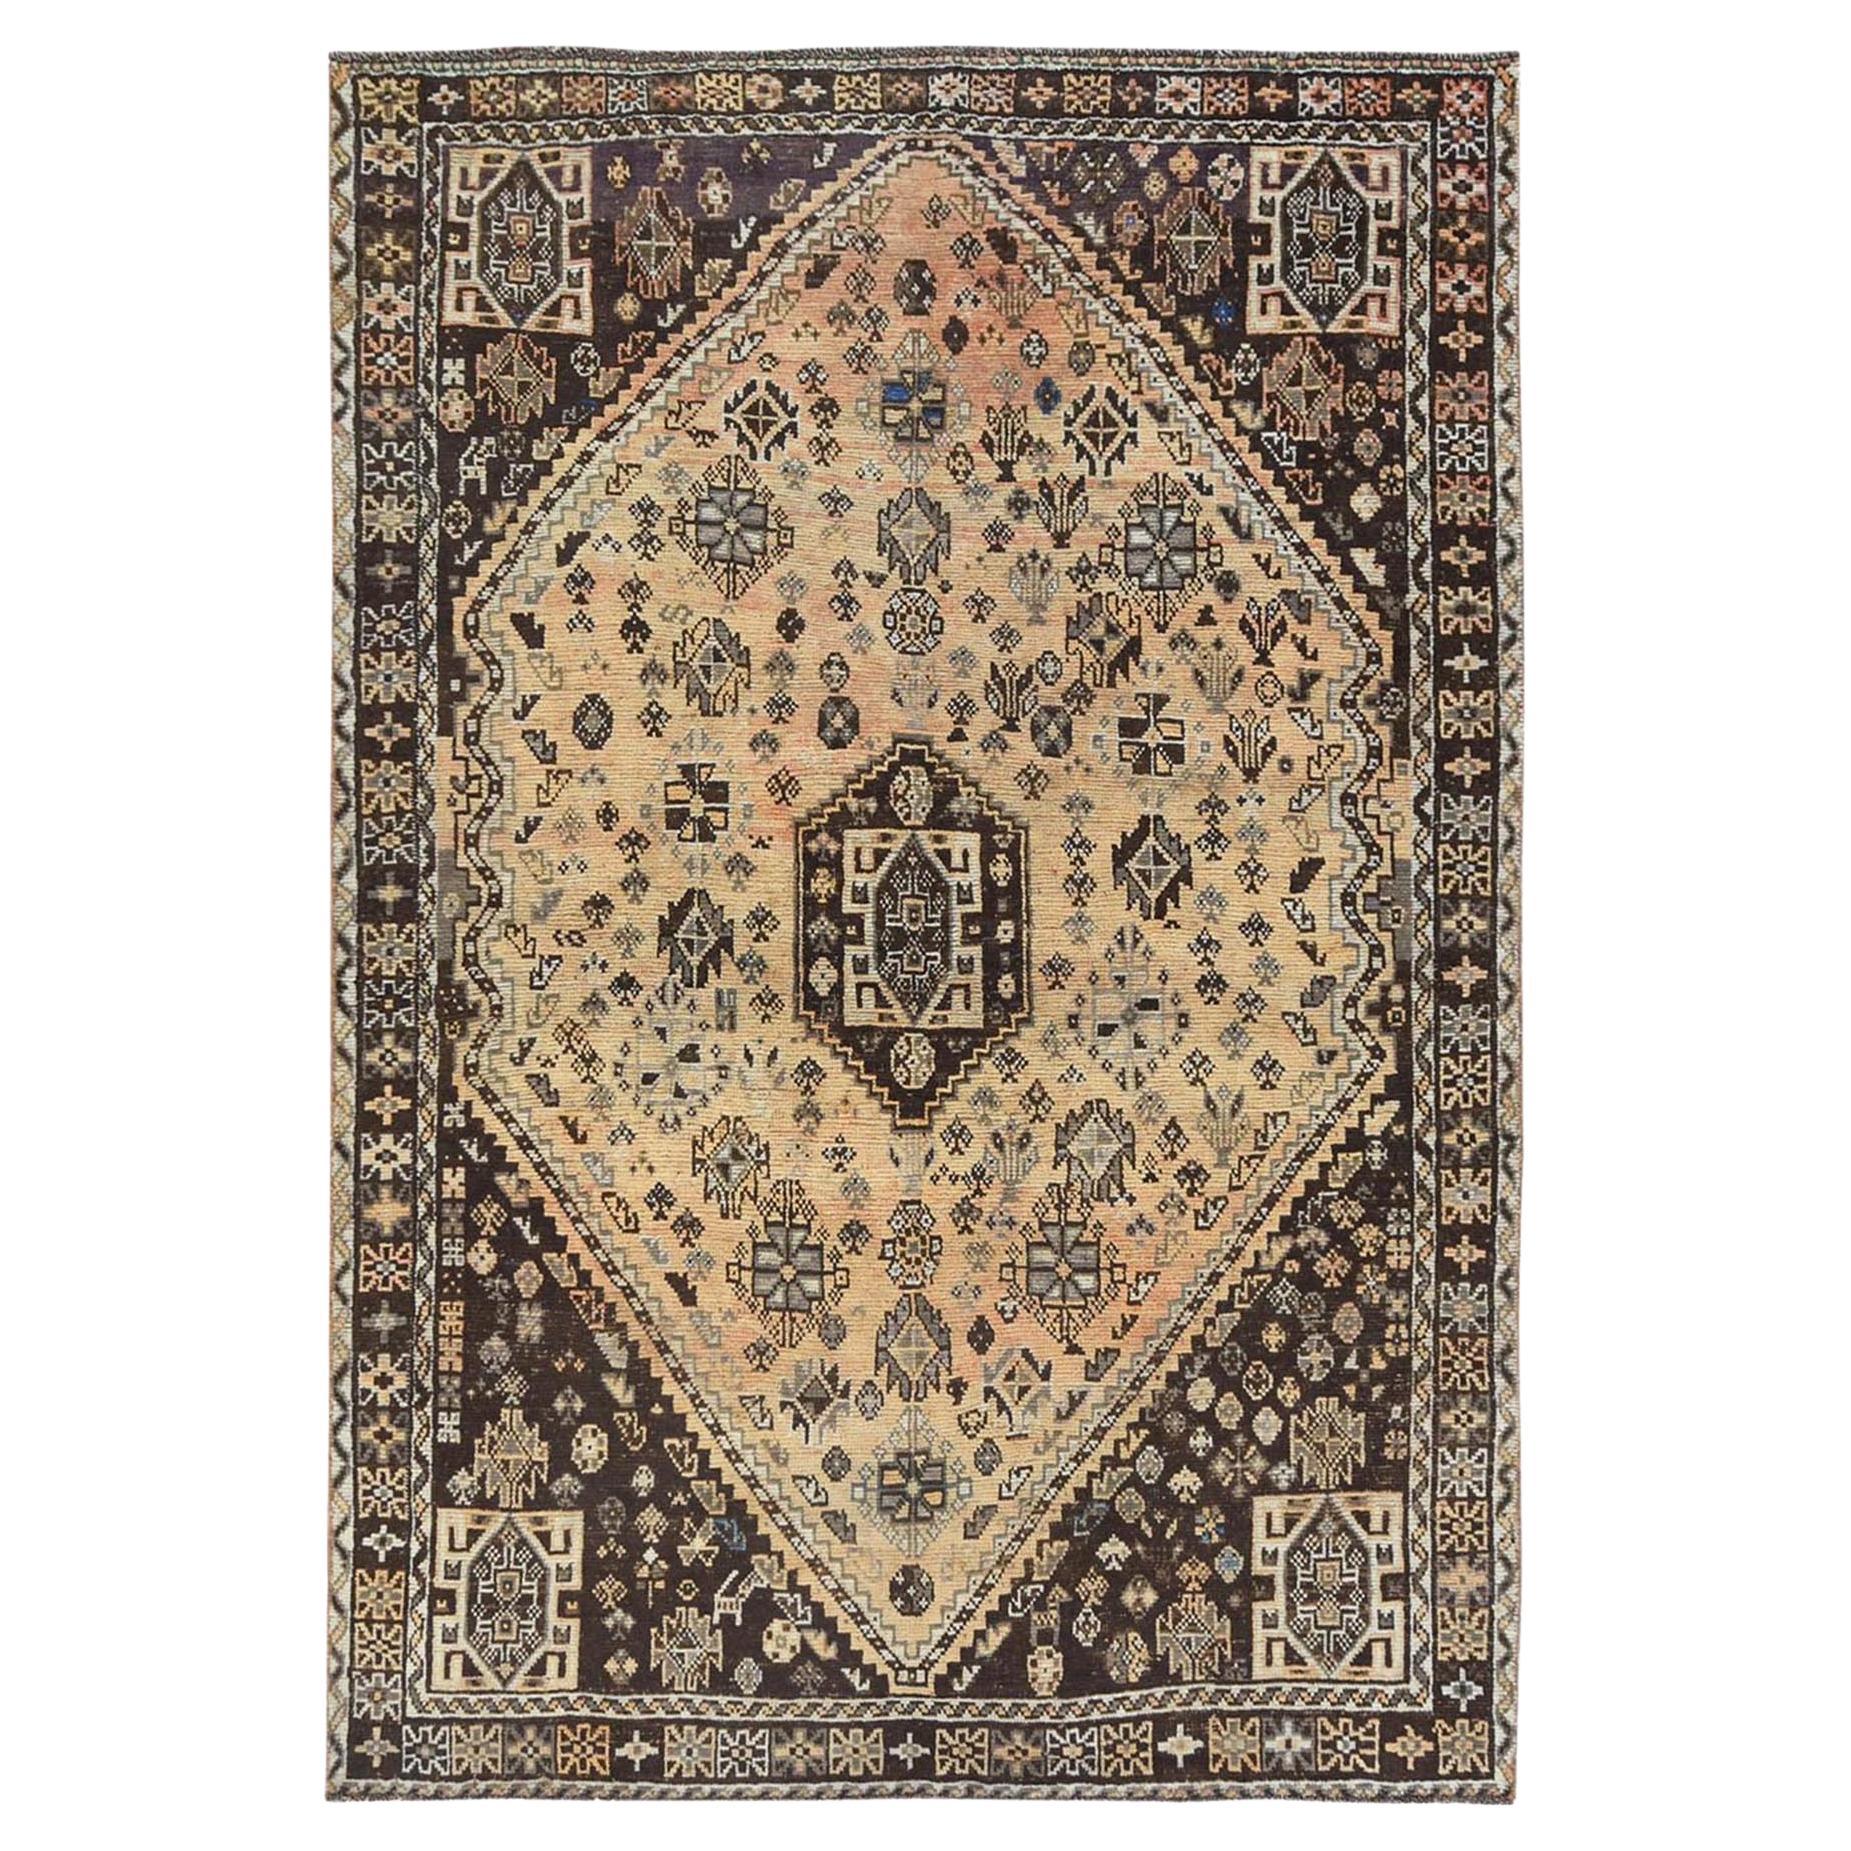 Sand Color, Distressed Look Worn Wool Hand Knotted, Vintage Persian Shiraz Rug